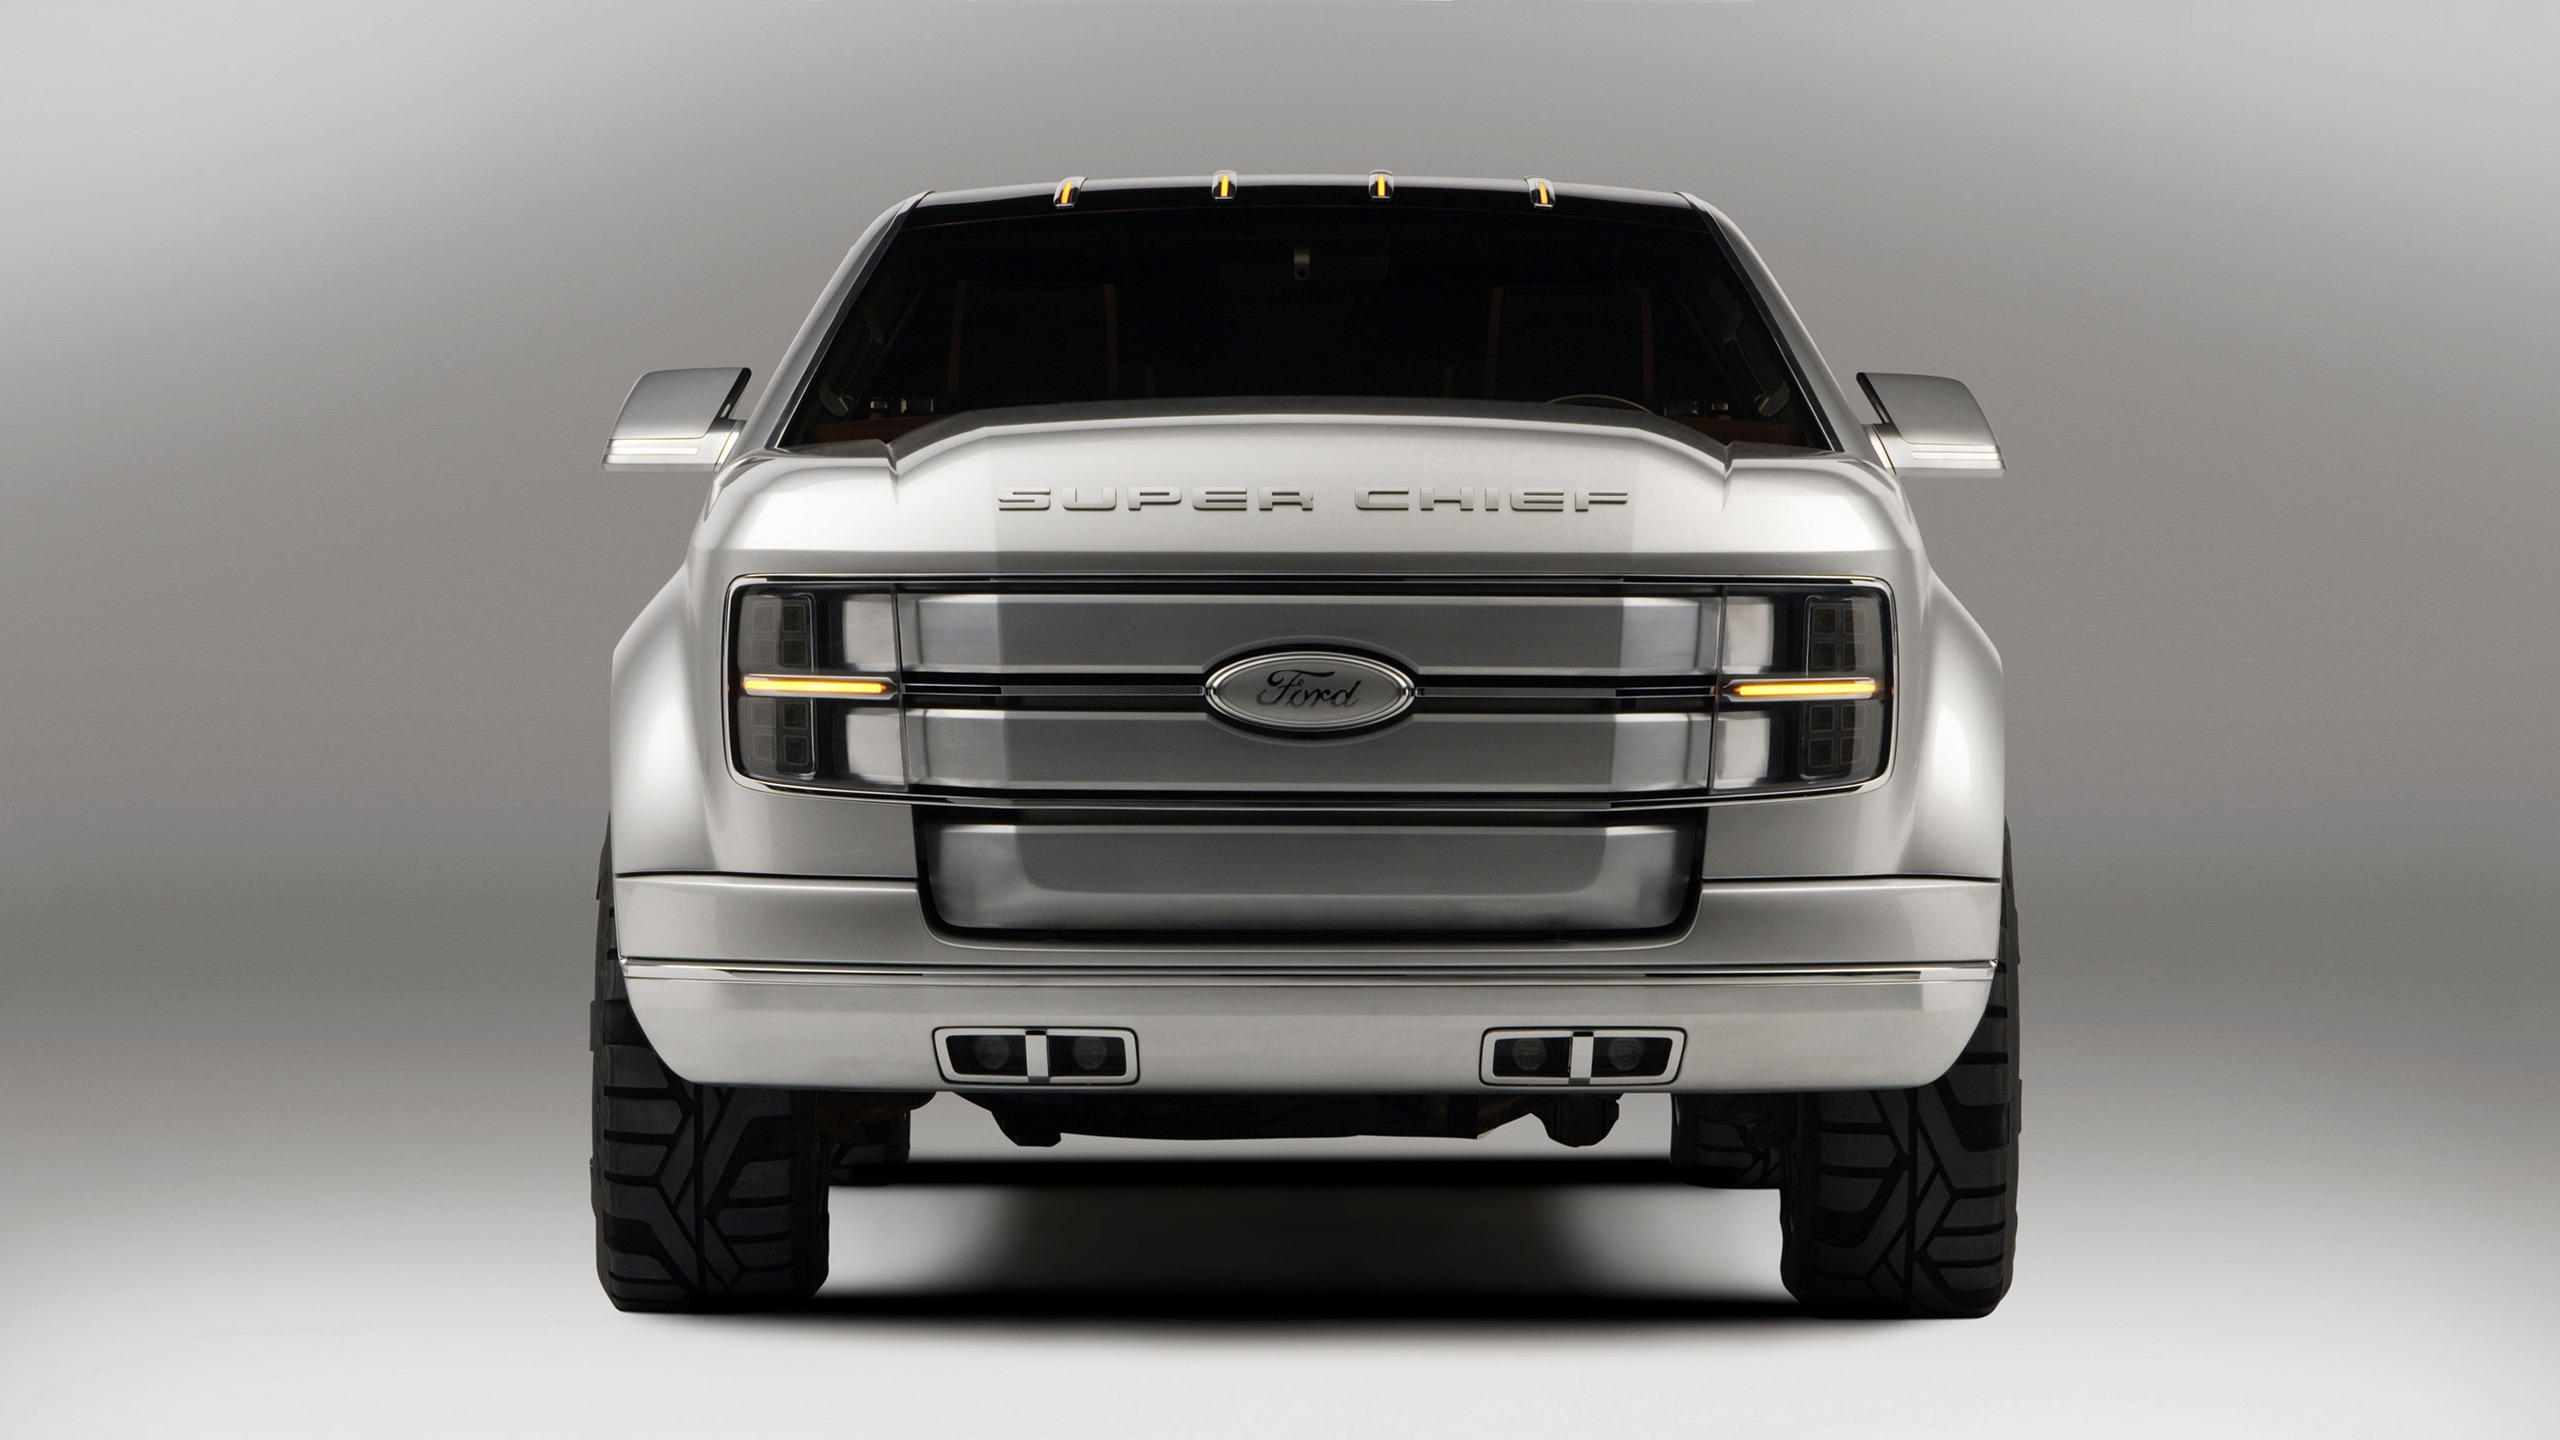 Ford Super Chief for 2560x1440 HDTV resolution